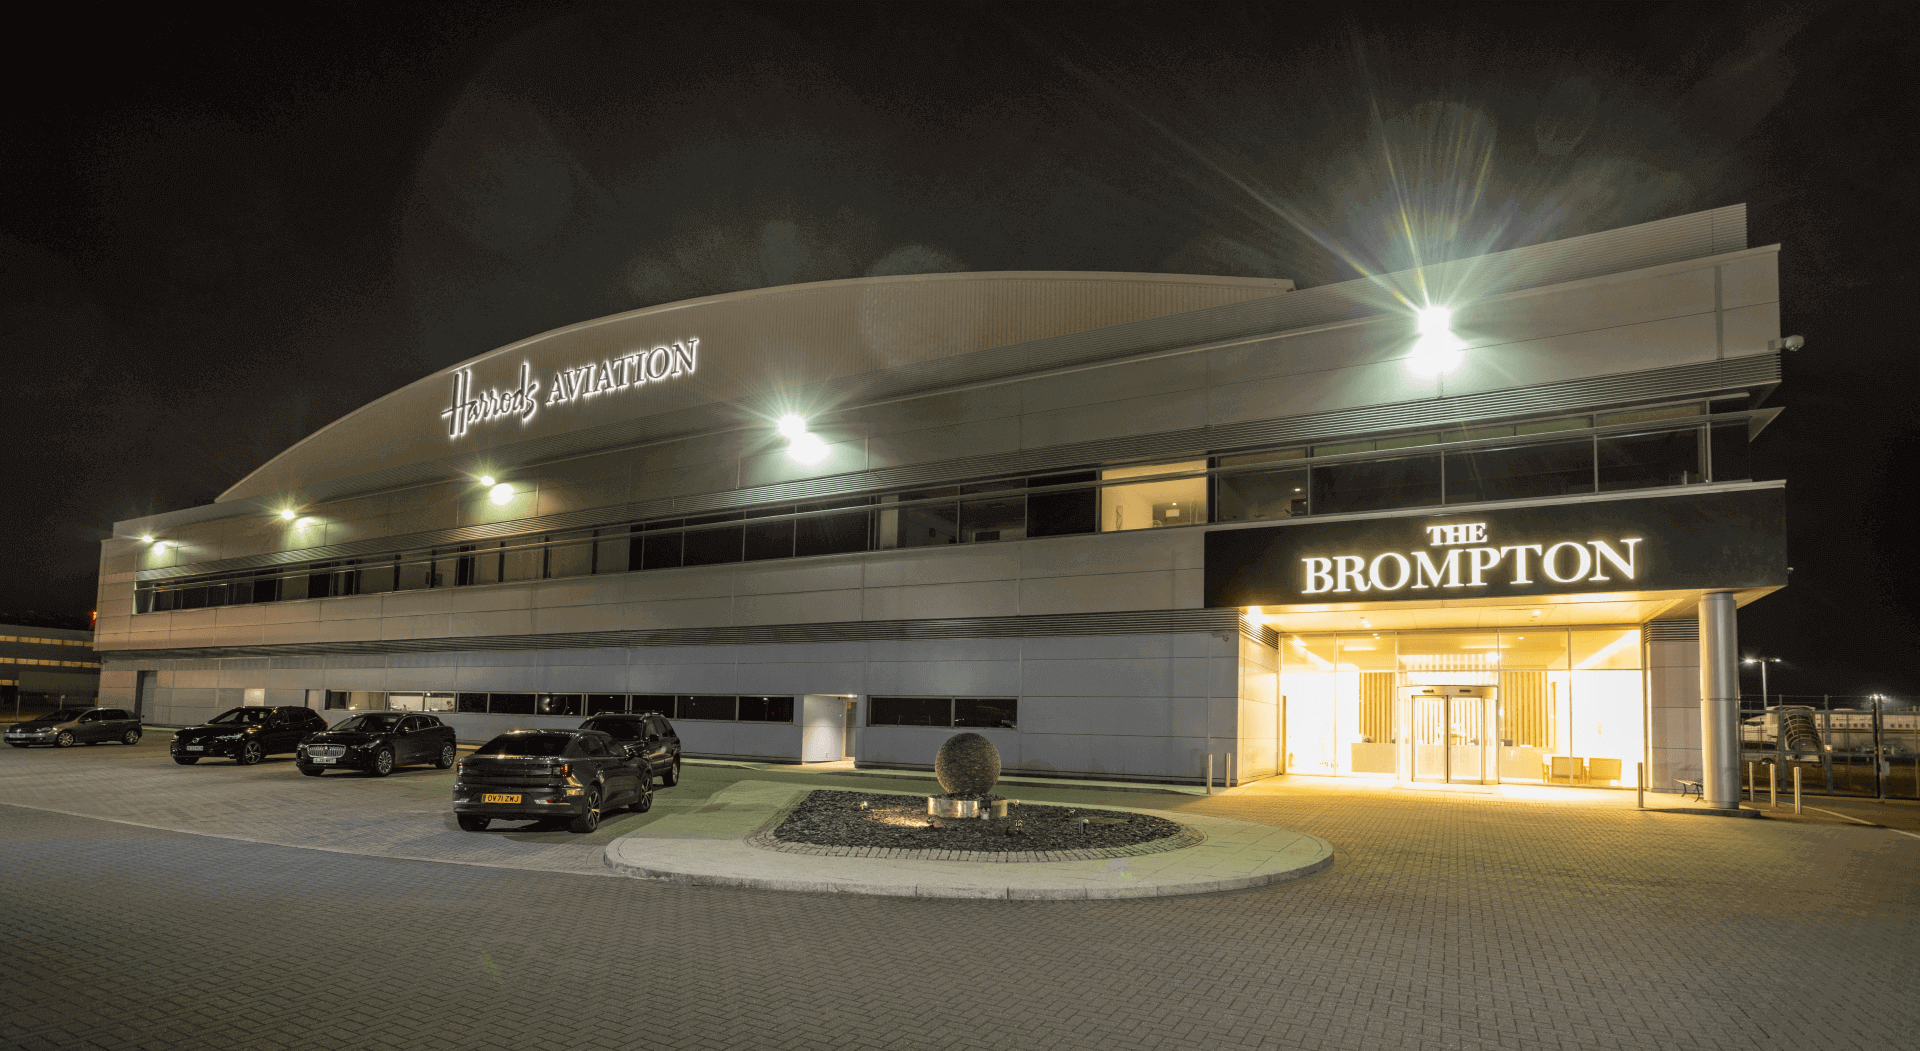 Illuminated Signage The Brompton At Harrods Aviation London Stansted Airport